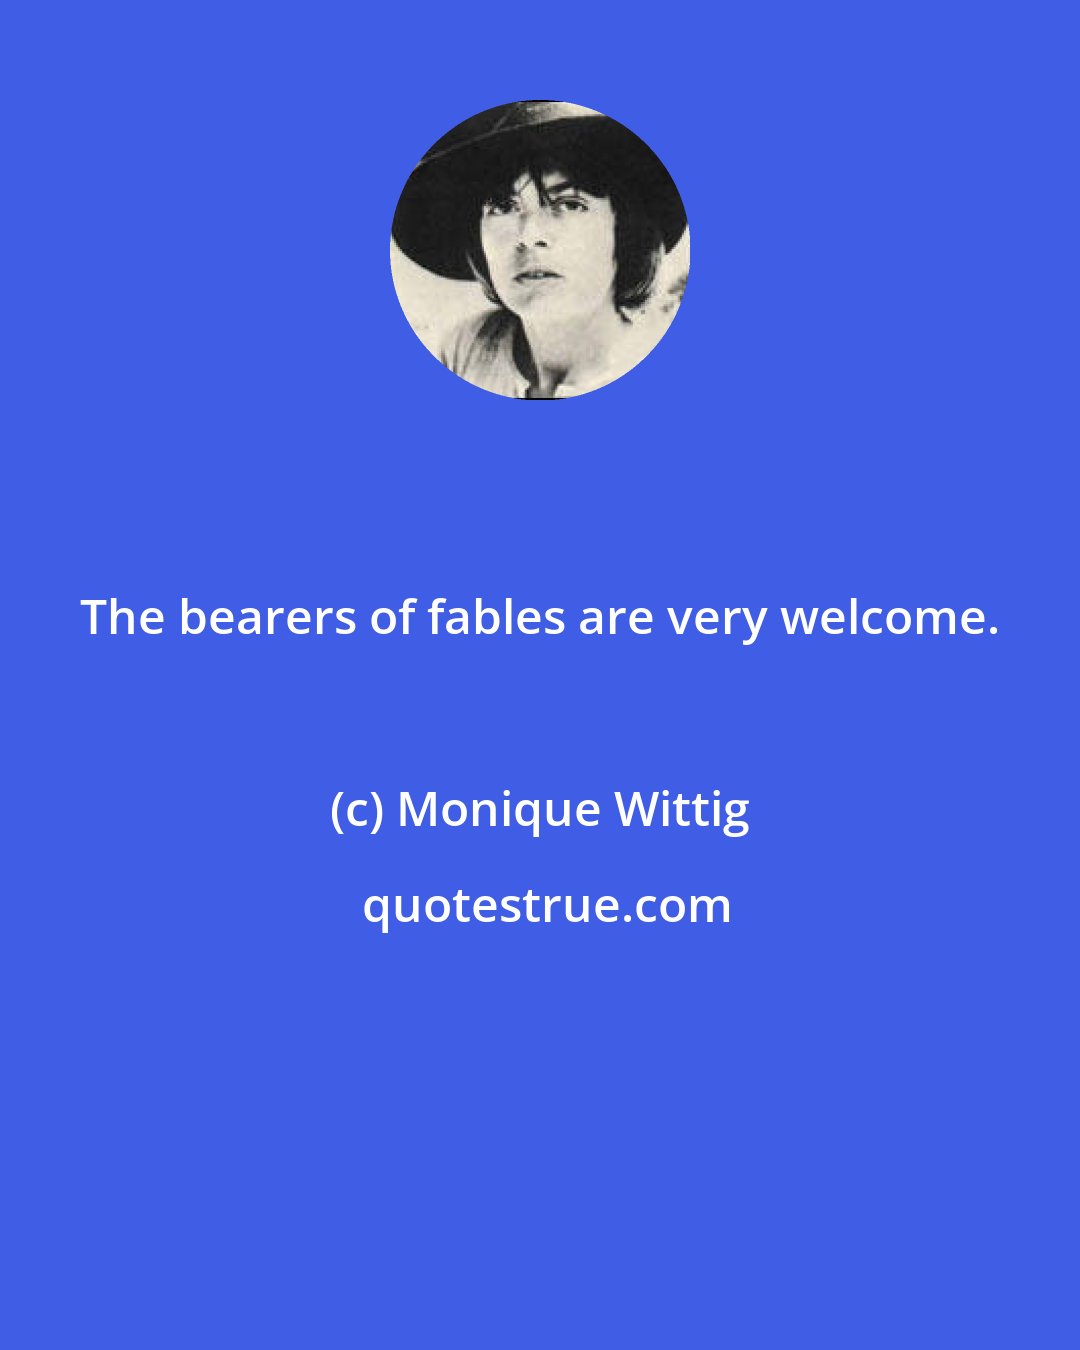 Monique Wittig: The bearers of fables are very welcome.